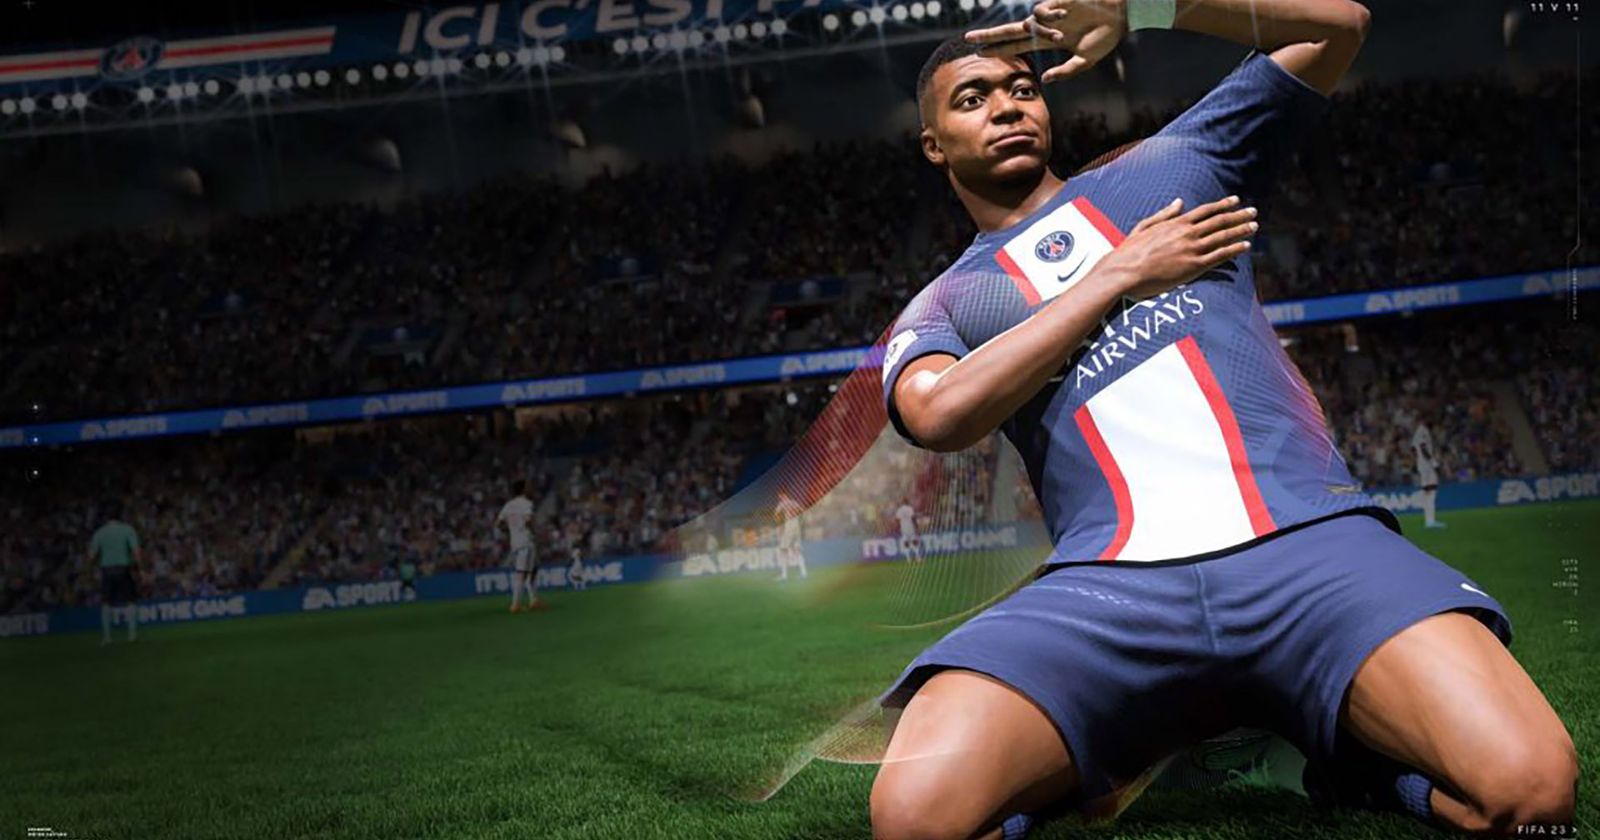 Benefits of pre-ordering EA FC 24 - Bonuses, early access and release date  as FIFA rebrands - Chronicle Live